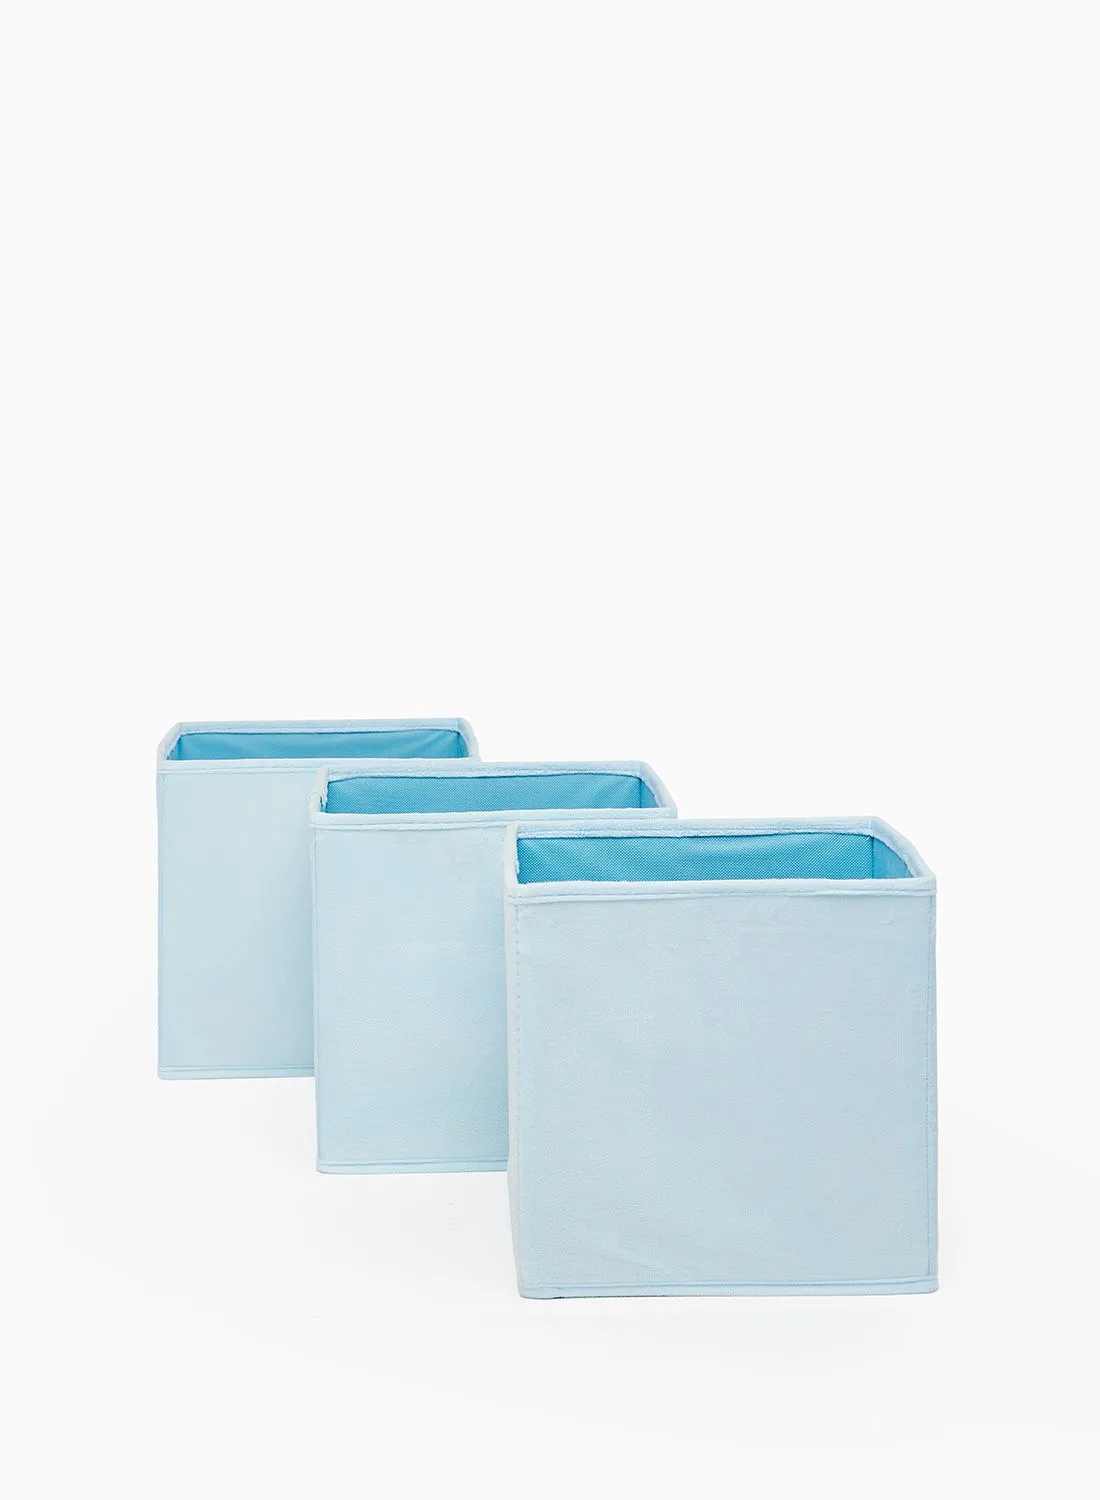 Amal 3 Pack Foldable Cube Storage Bin For Clothes Storage In Closet, Easy Collapsible, Sturdy Fabric, Home Or Office Use, Easy To Carry And Space Saver light blue 25X25X25cm